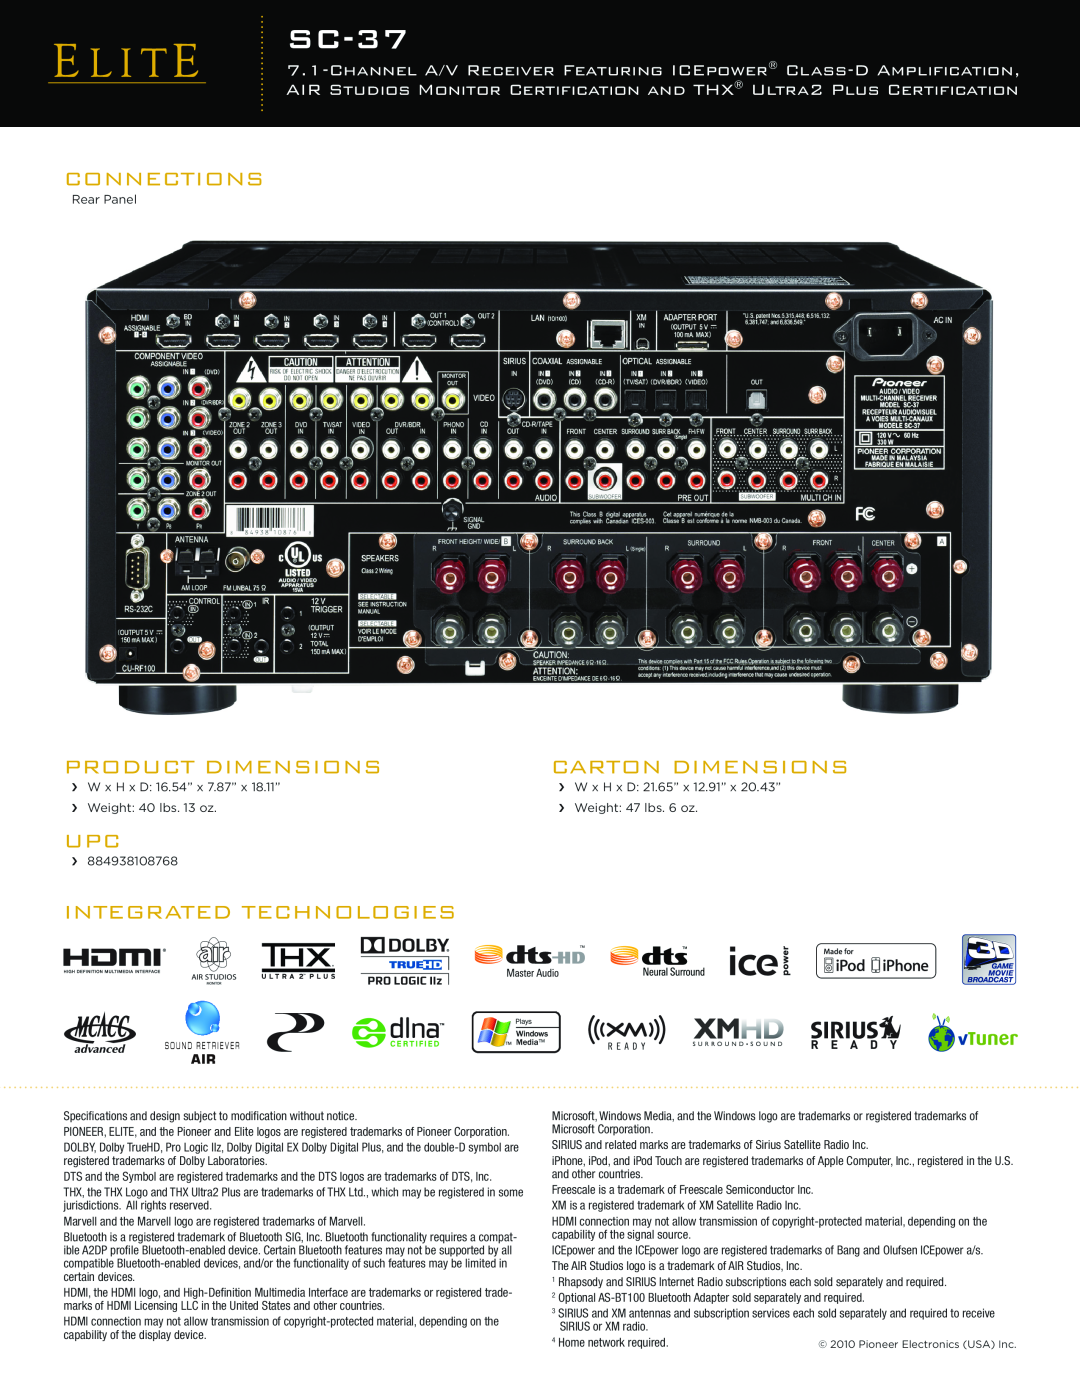 Pioneer SC-37 manual Connections, Product Dimensions, Carton Dimensions, Integrated Technologies 